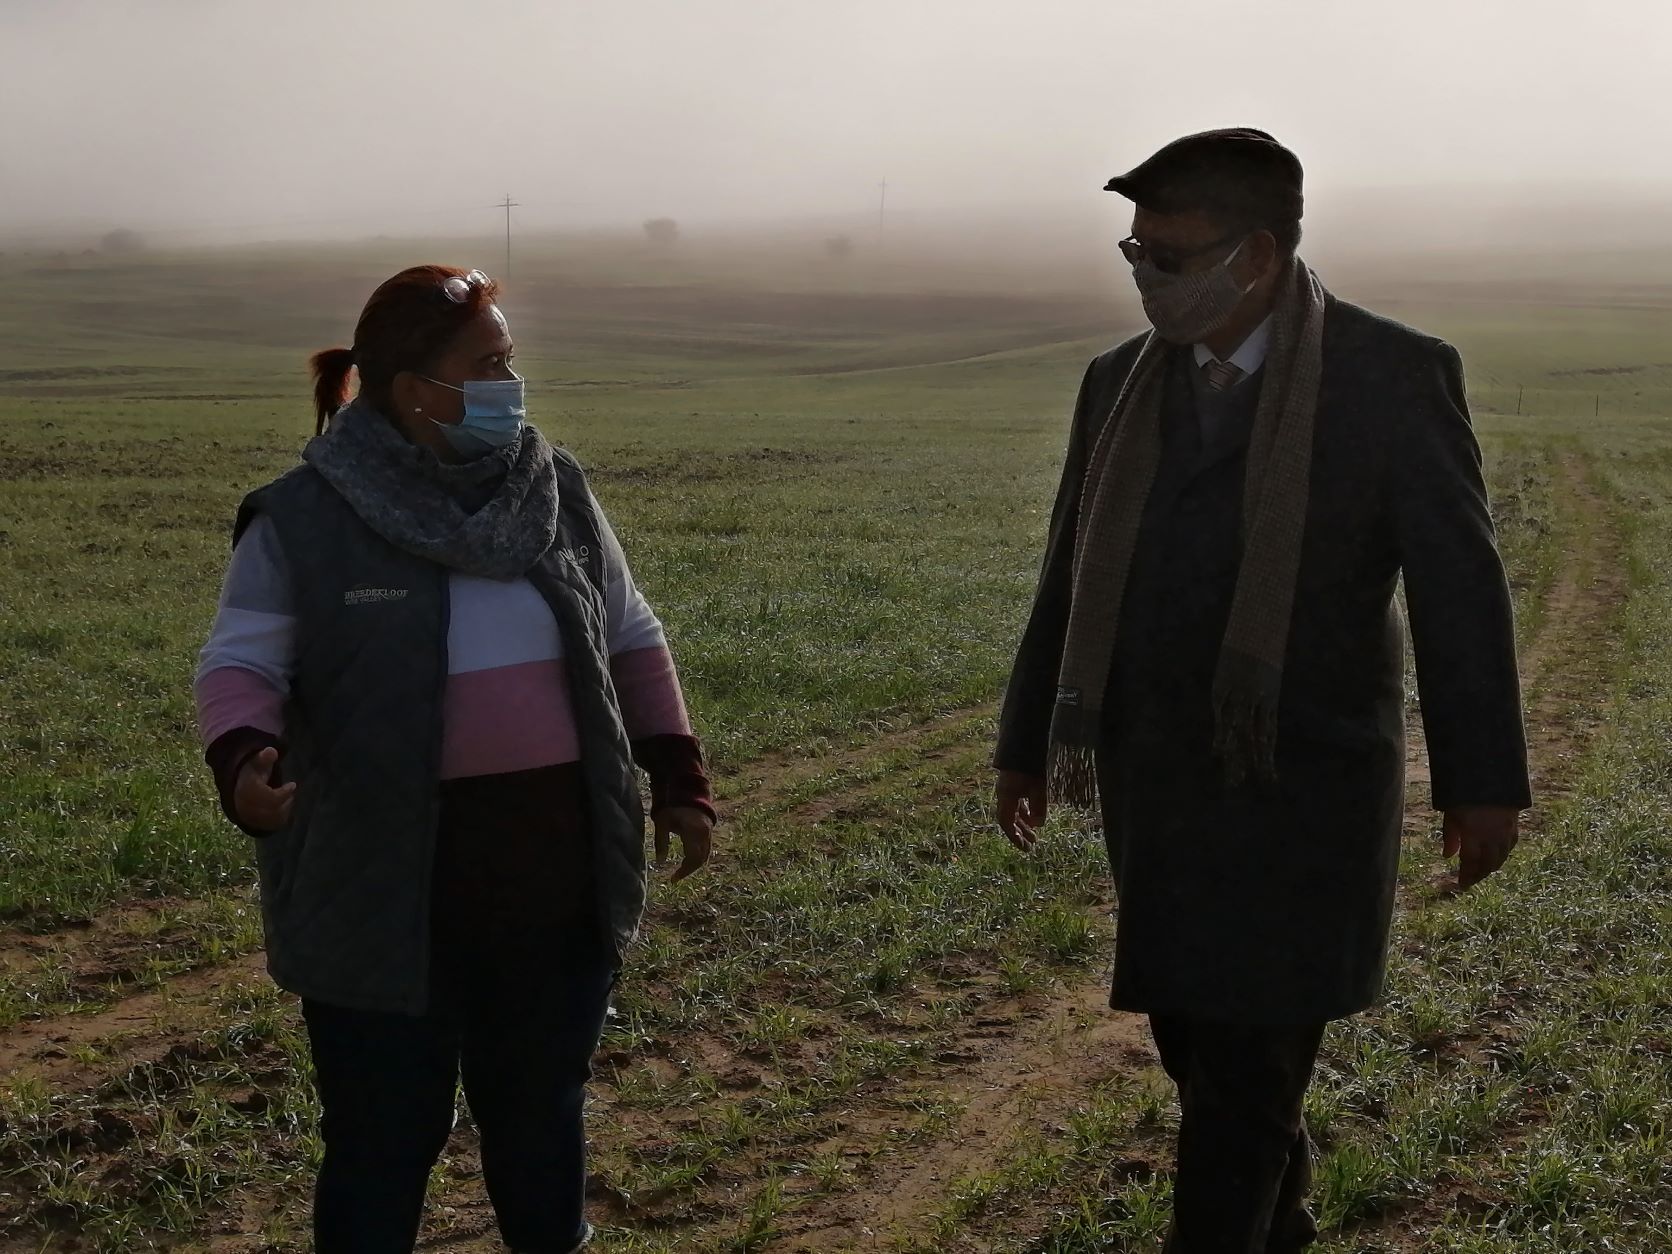 Grain Farmer Alfreda Mars and Minister Meyer during a visit in 2020